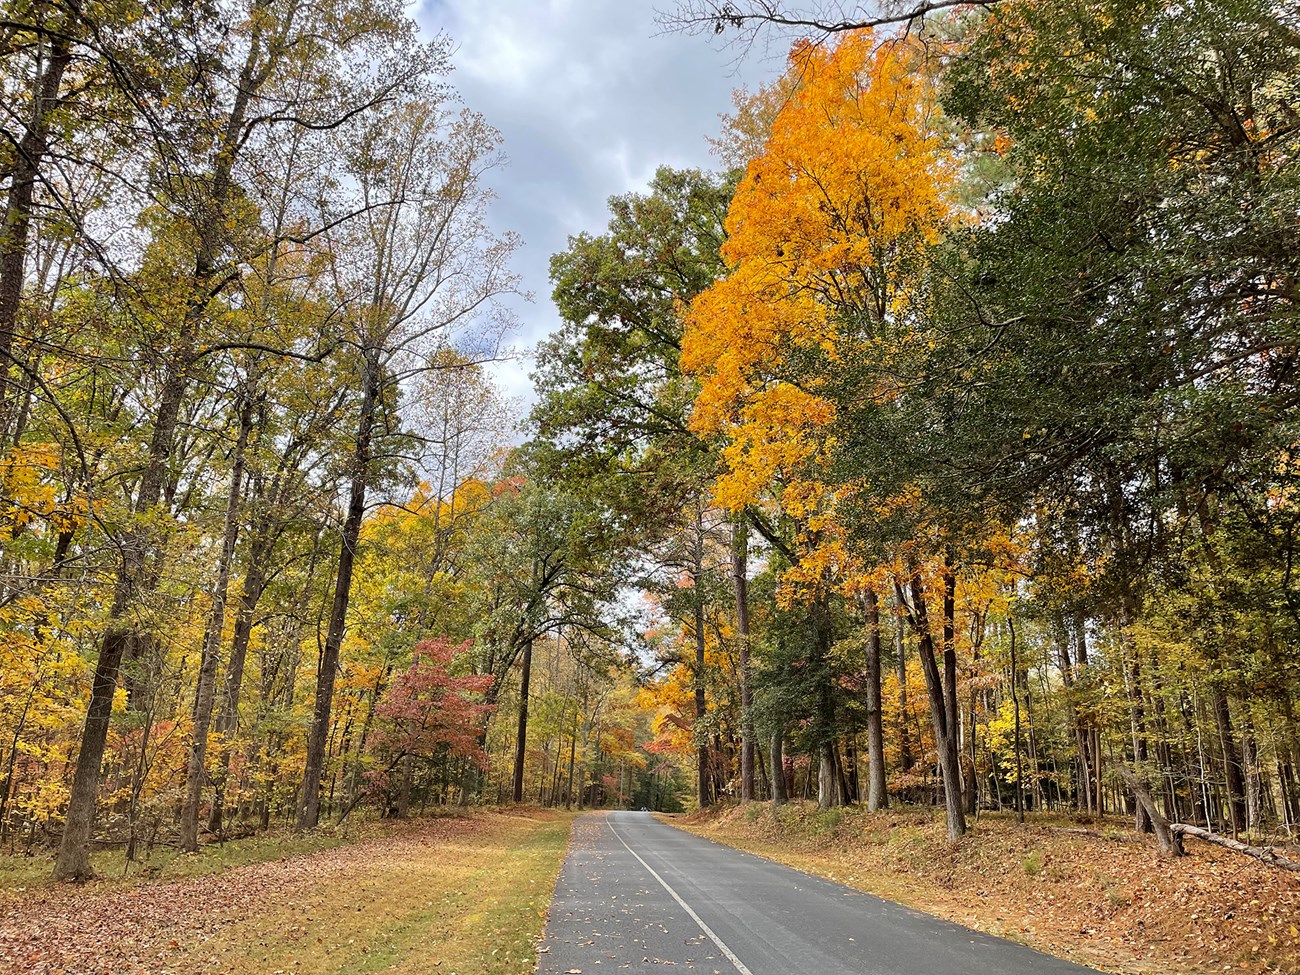 Trees with red, yellow, and green leave line a single lane road.